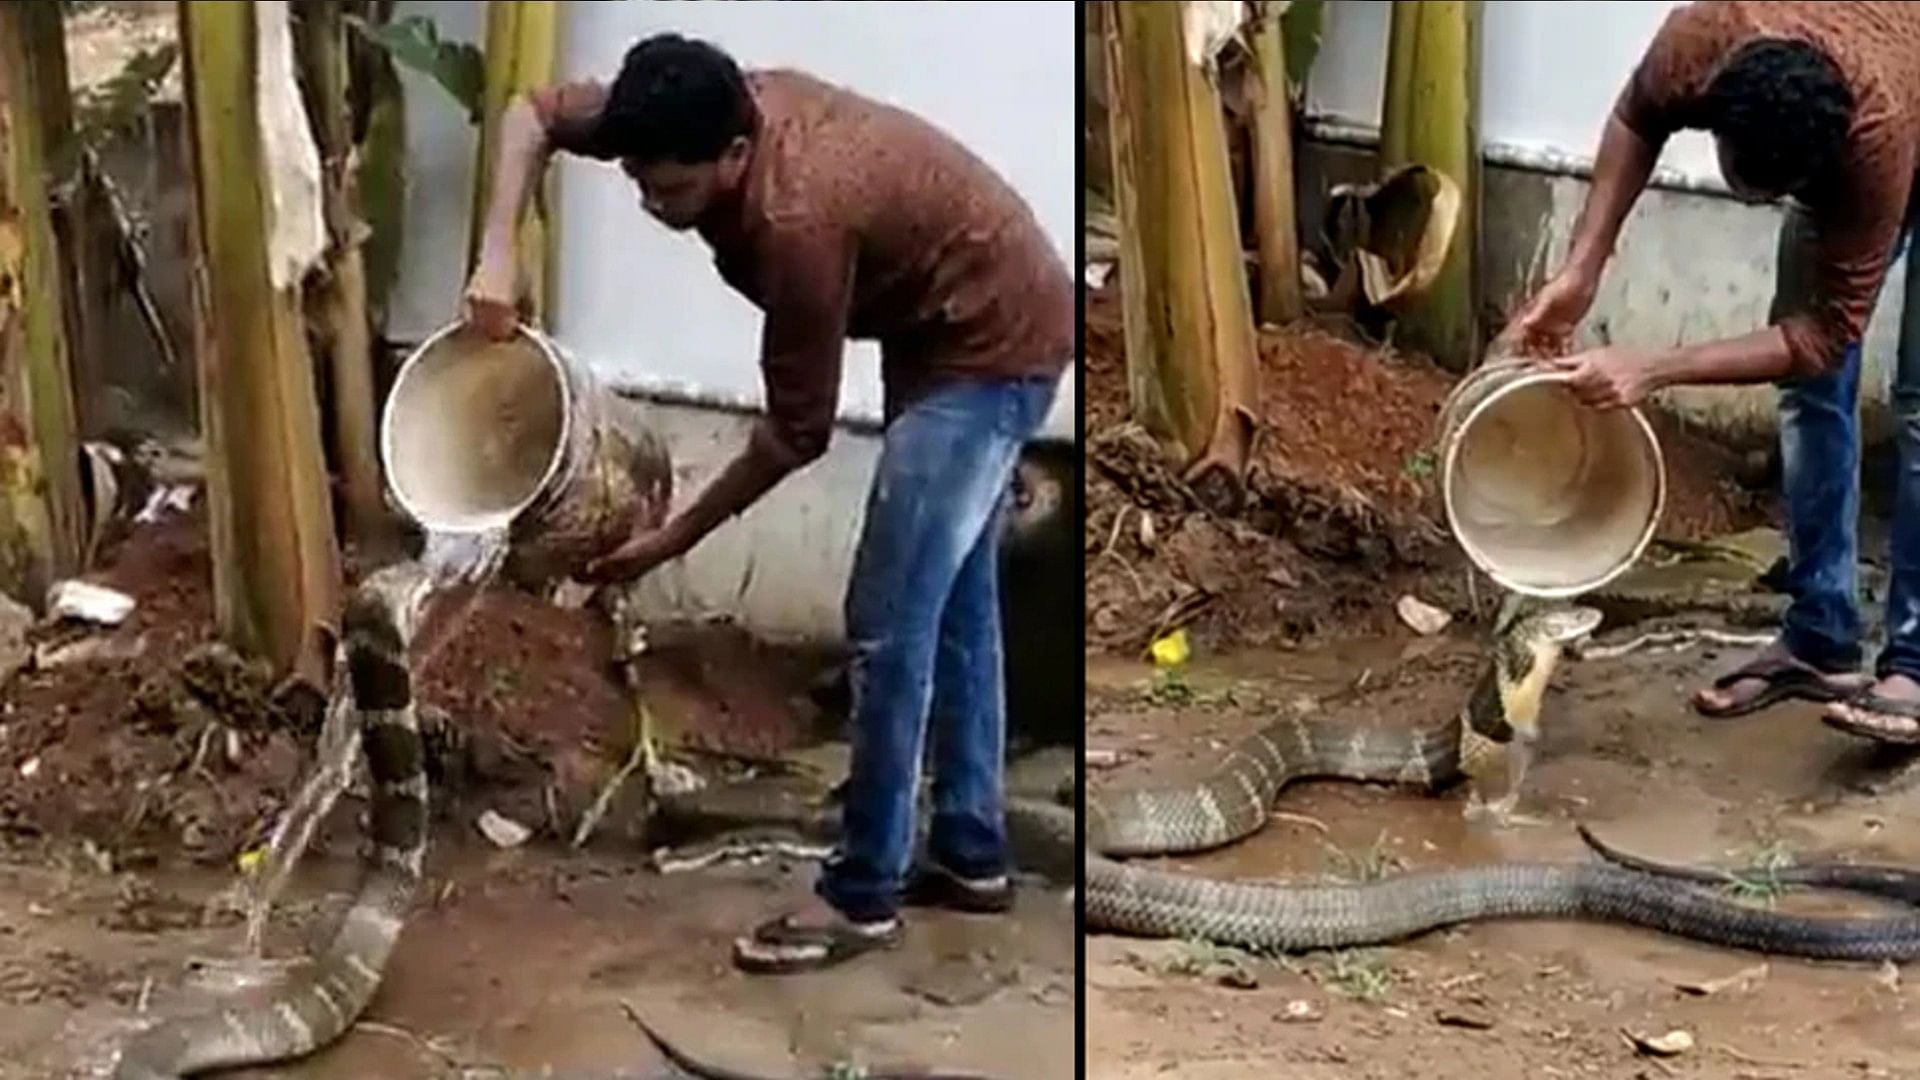 Man poured water on king cobra sitting under tap video goes viral on social media